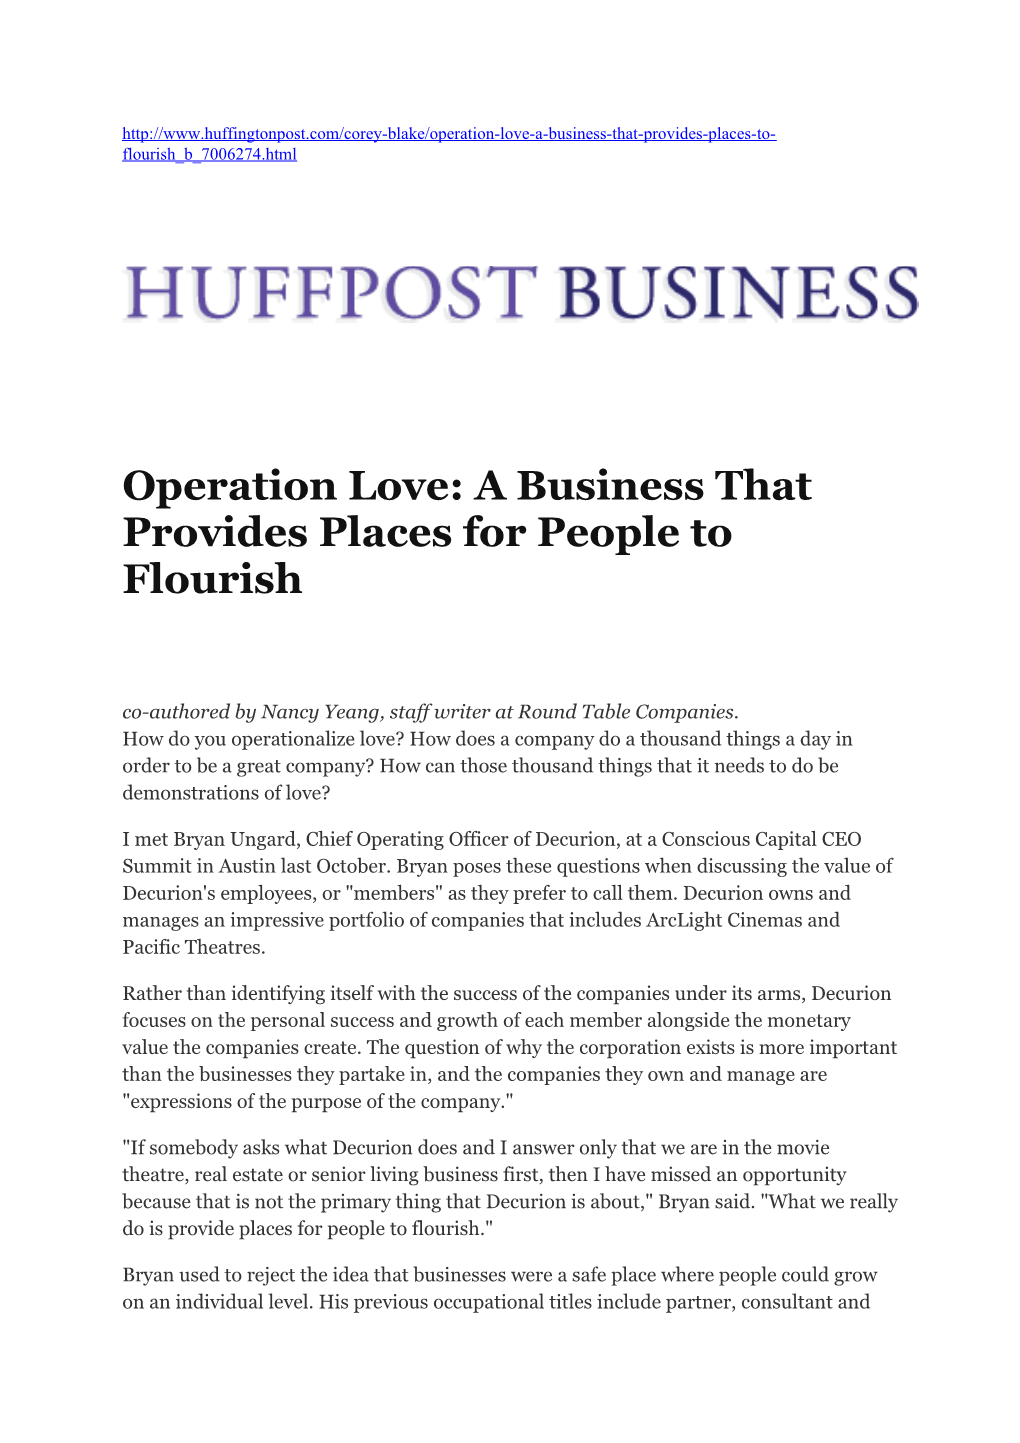 Operation Love: a Business That Provides Places for People to Flourish